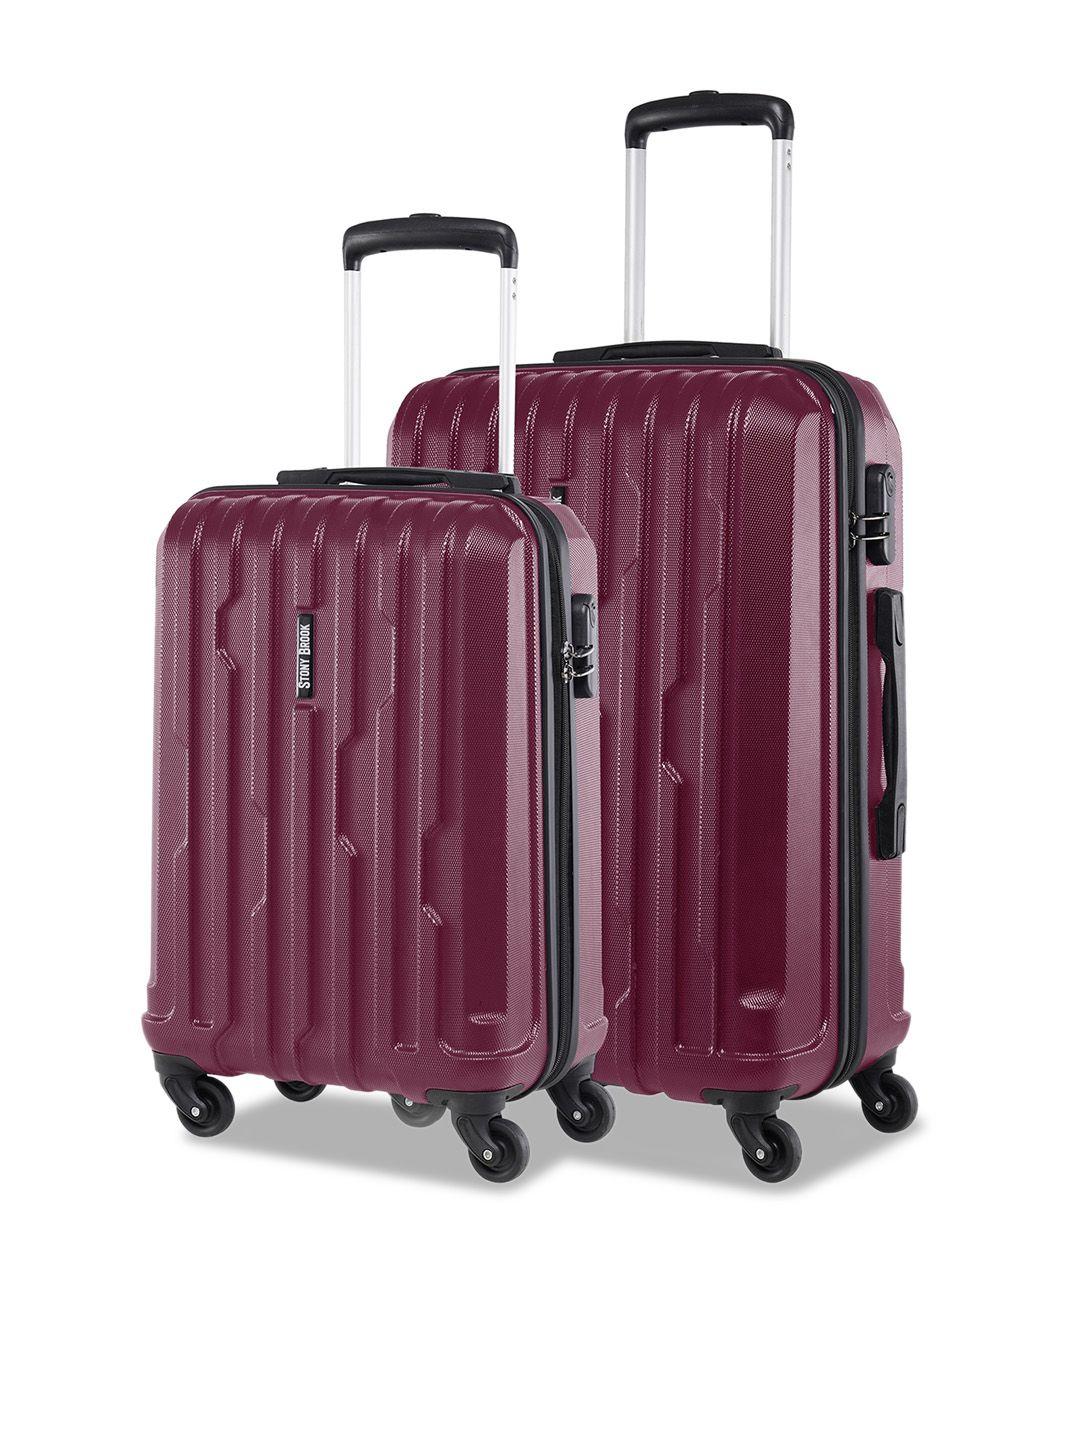 stony brook by nasher miles set of 2 hard-sided trolley suitcases